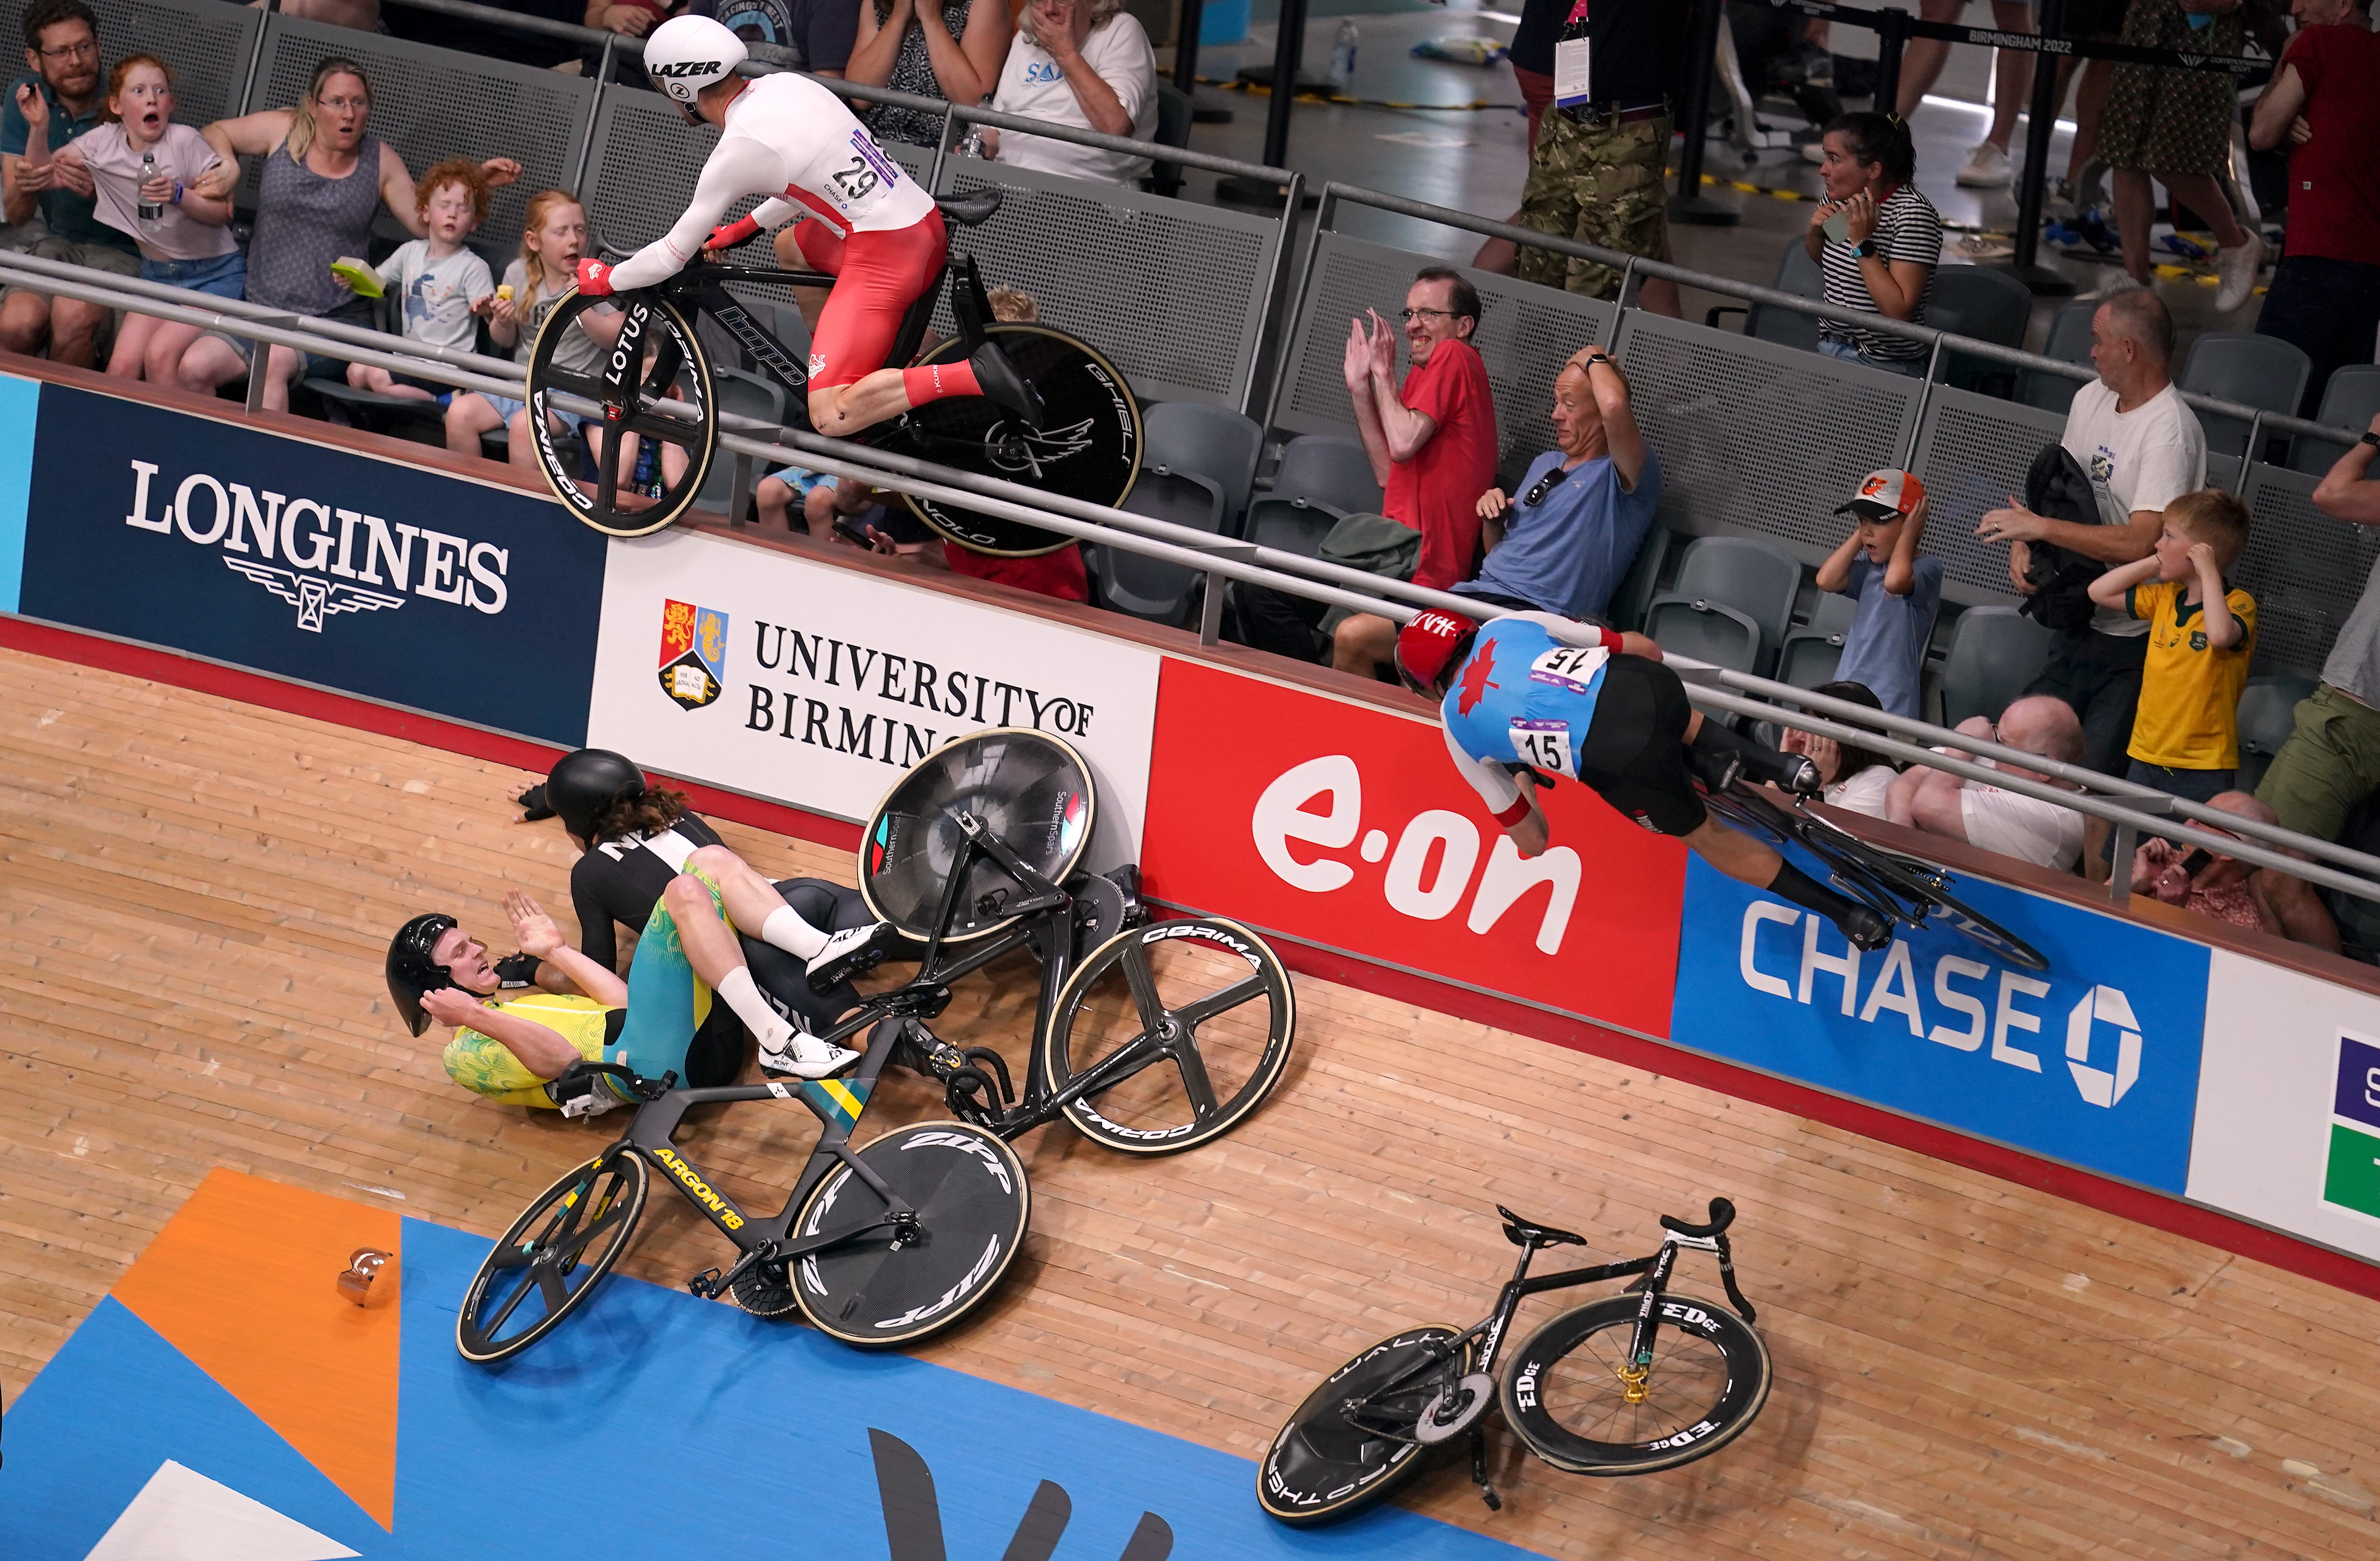 England’s Matt Walls goes over the barrier into the crowd after a crash in the Men’s 15km Scratch Race Qualifying Round at the Commonwealth Games (John Walton/PA)